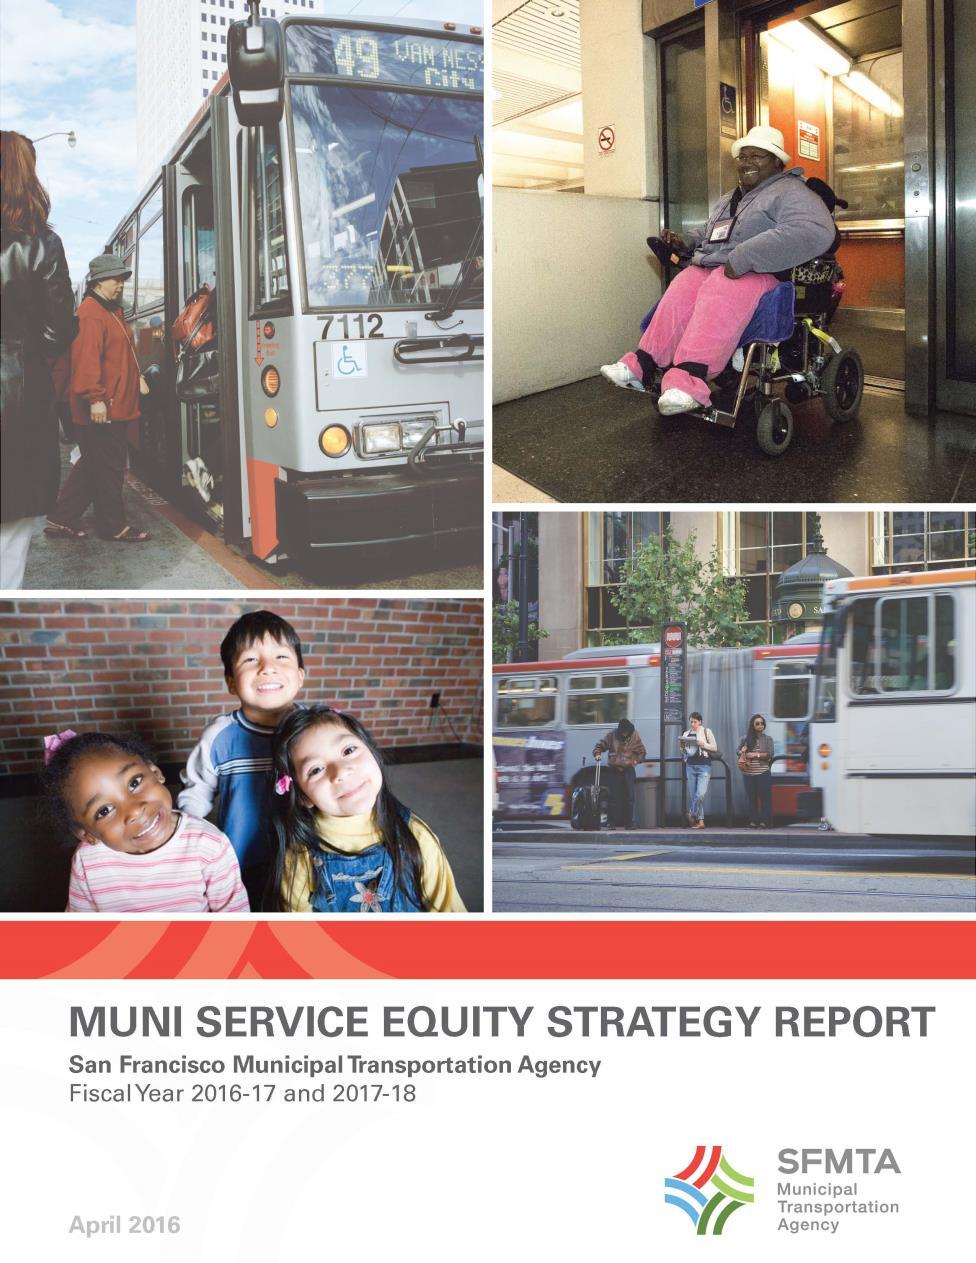 Building on Affordability and Access All San Francisco residents within ¼ mile of a transit stop Systemwide Improvements 10% service increase New buses and trains 40 miles of transit priority